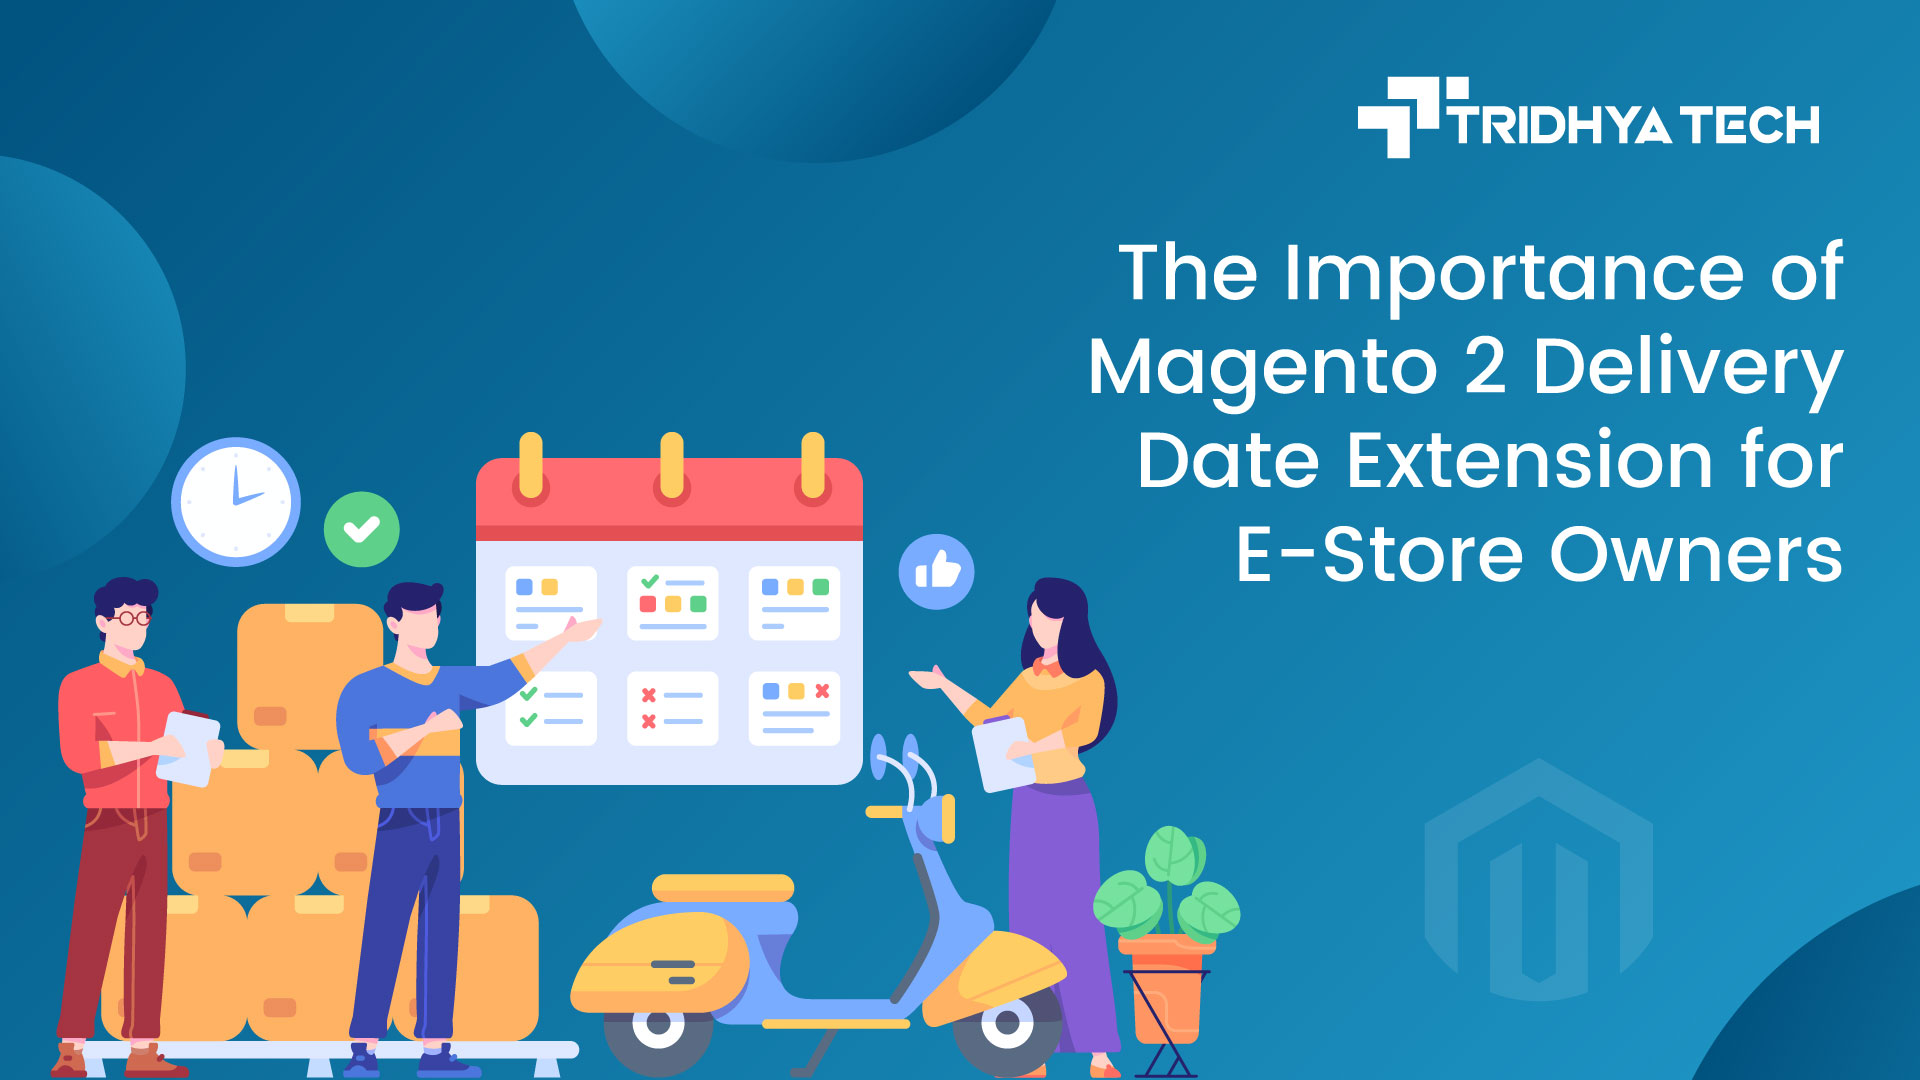 The Importance of Magento 2 Delivery Date Extension for E-Store Owners